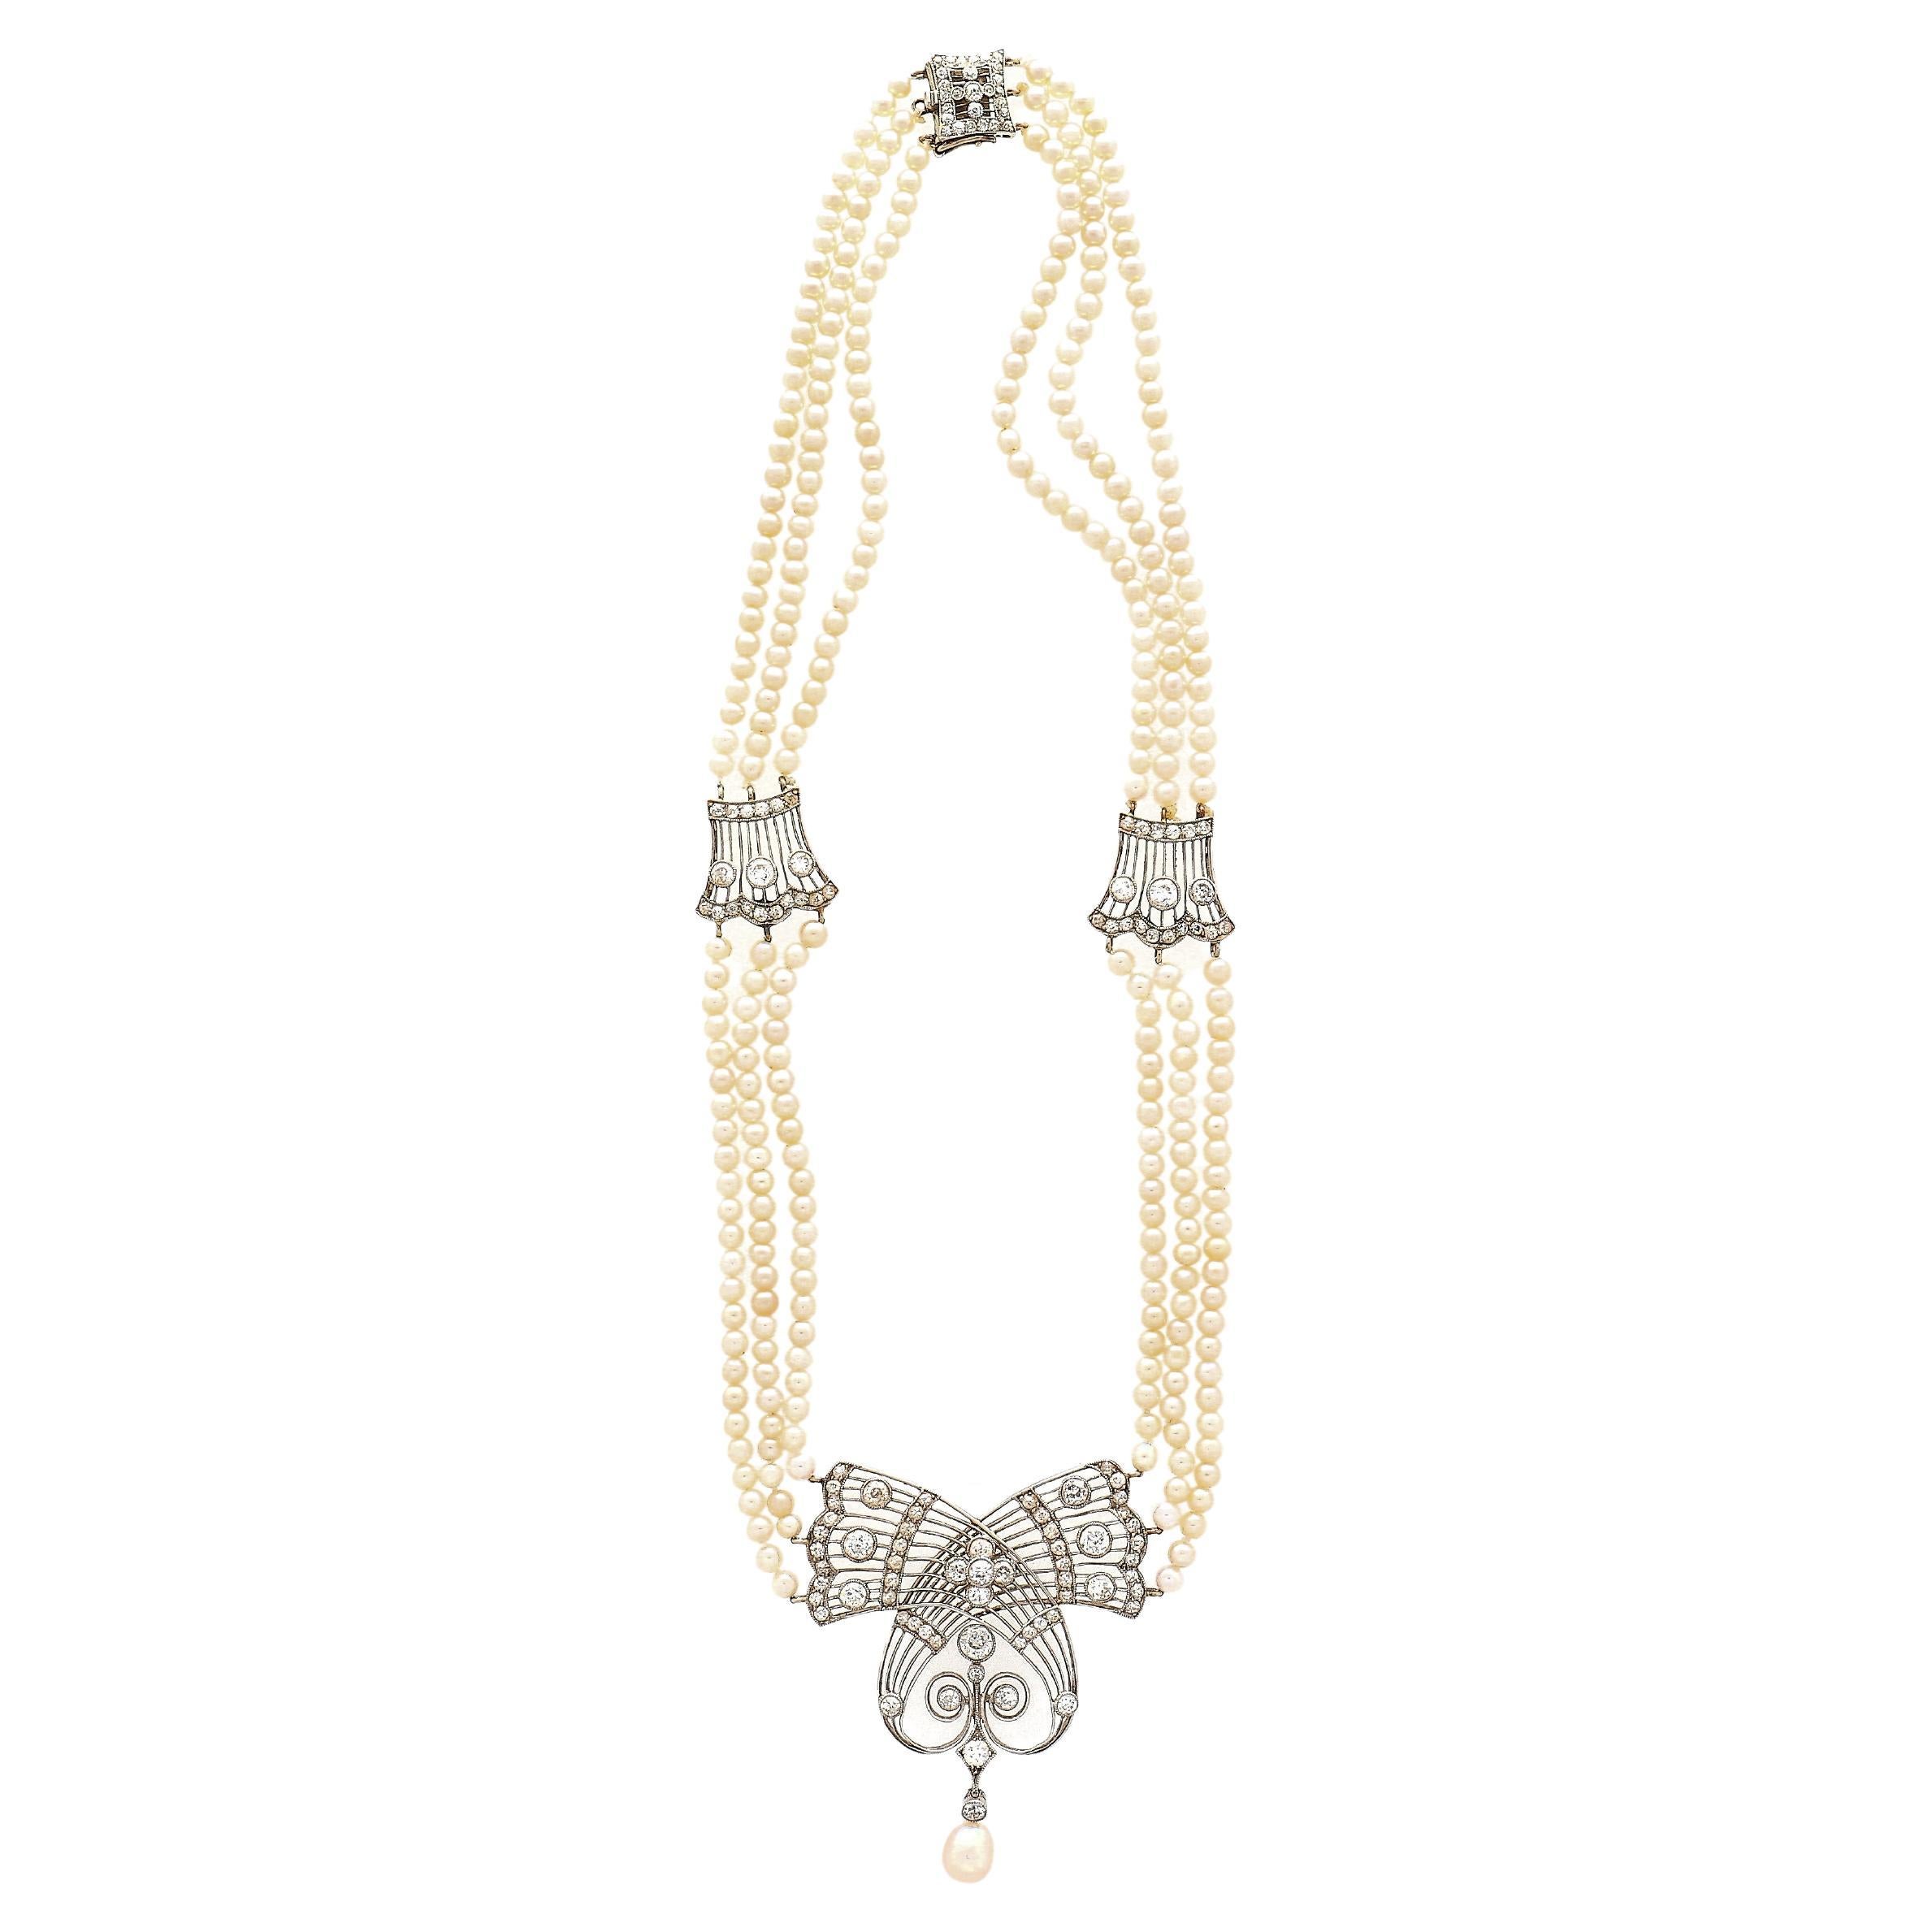 Original antique Edwardian era GIA certified saltwater pearl and diamond necklace in a platinum setting. The Pearls are all natural, untreated, and feature excellent luster. Fitted with a box closure and 14-inch length. This necklace is a piece of